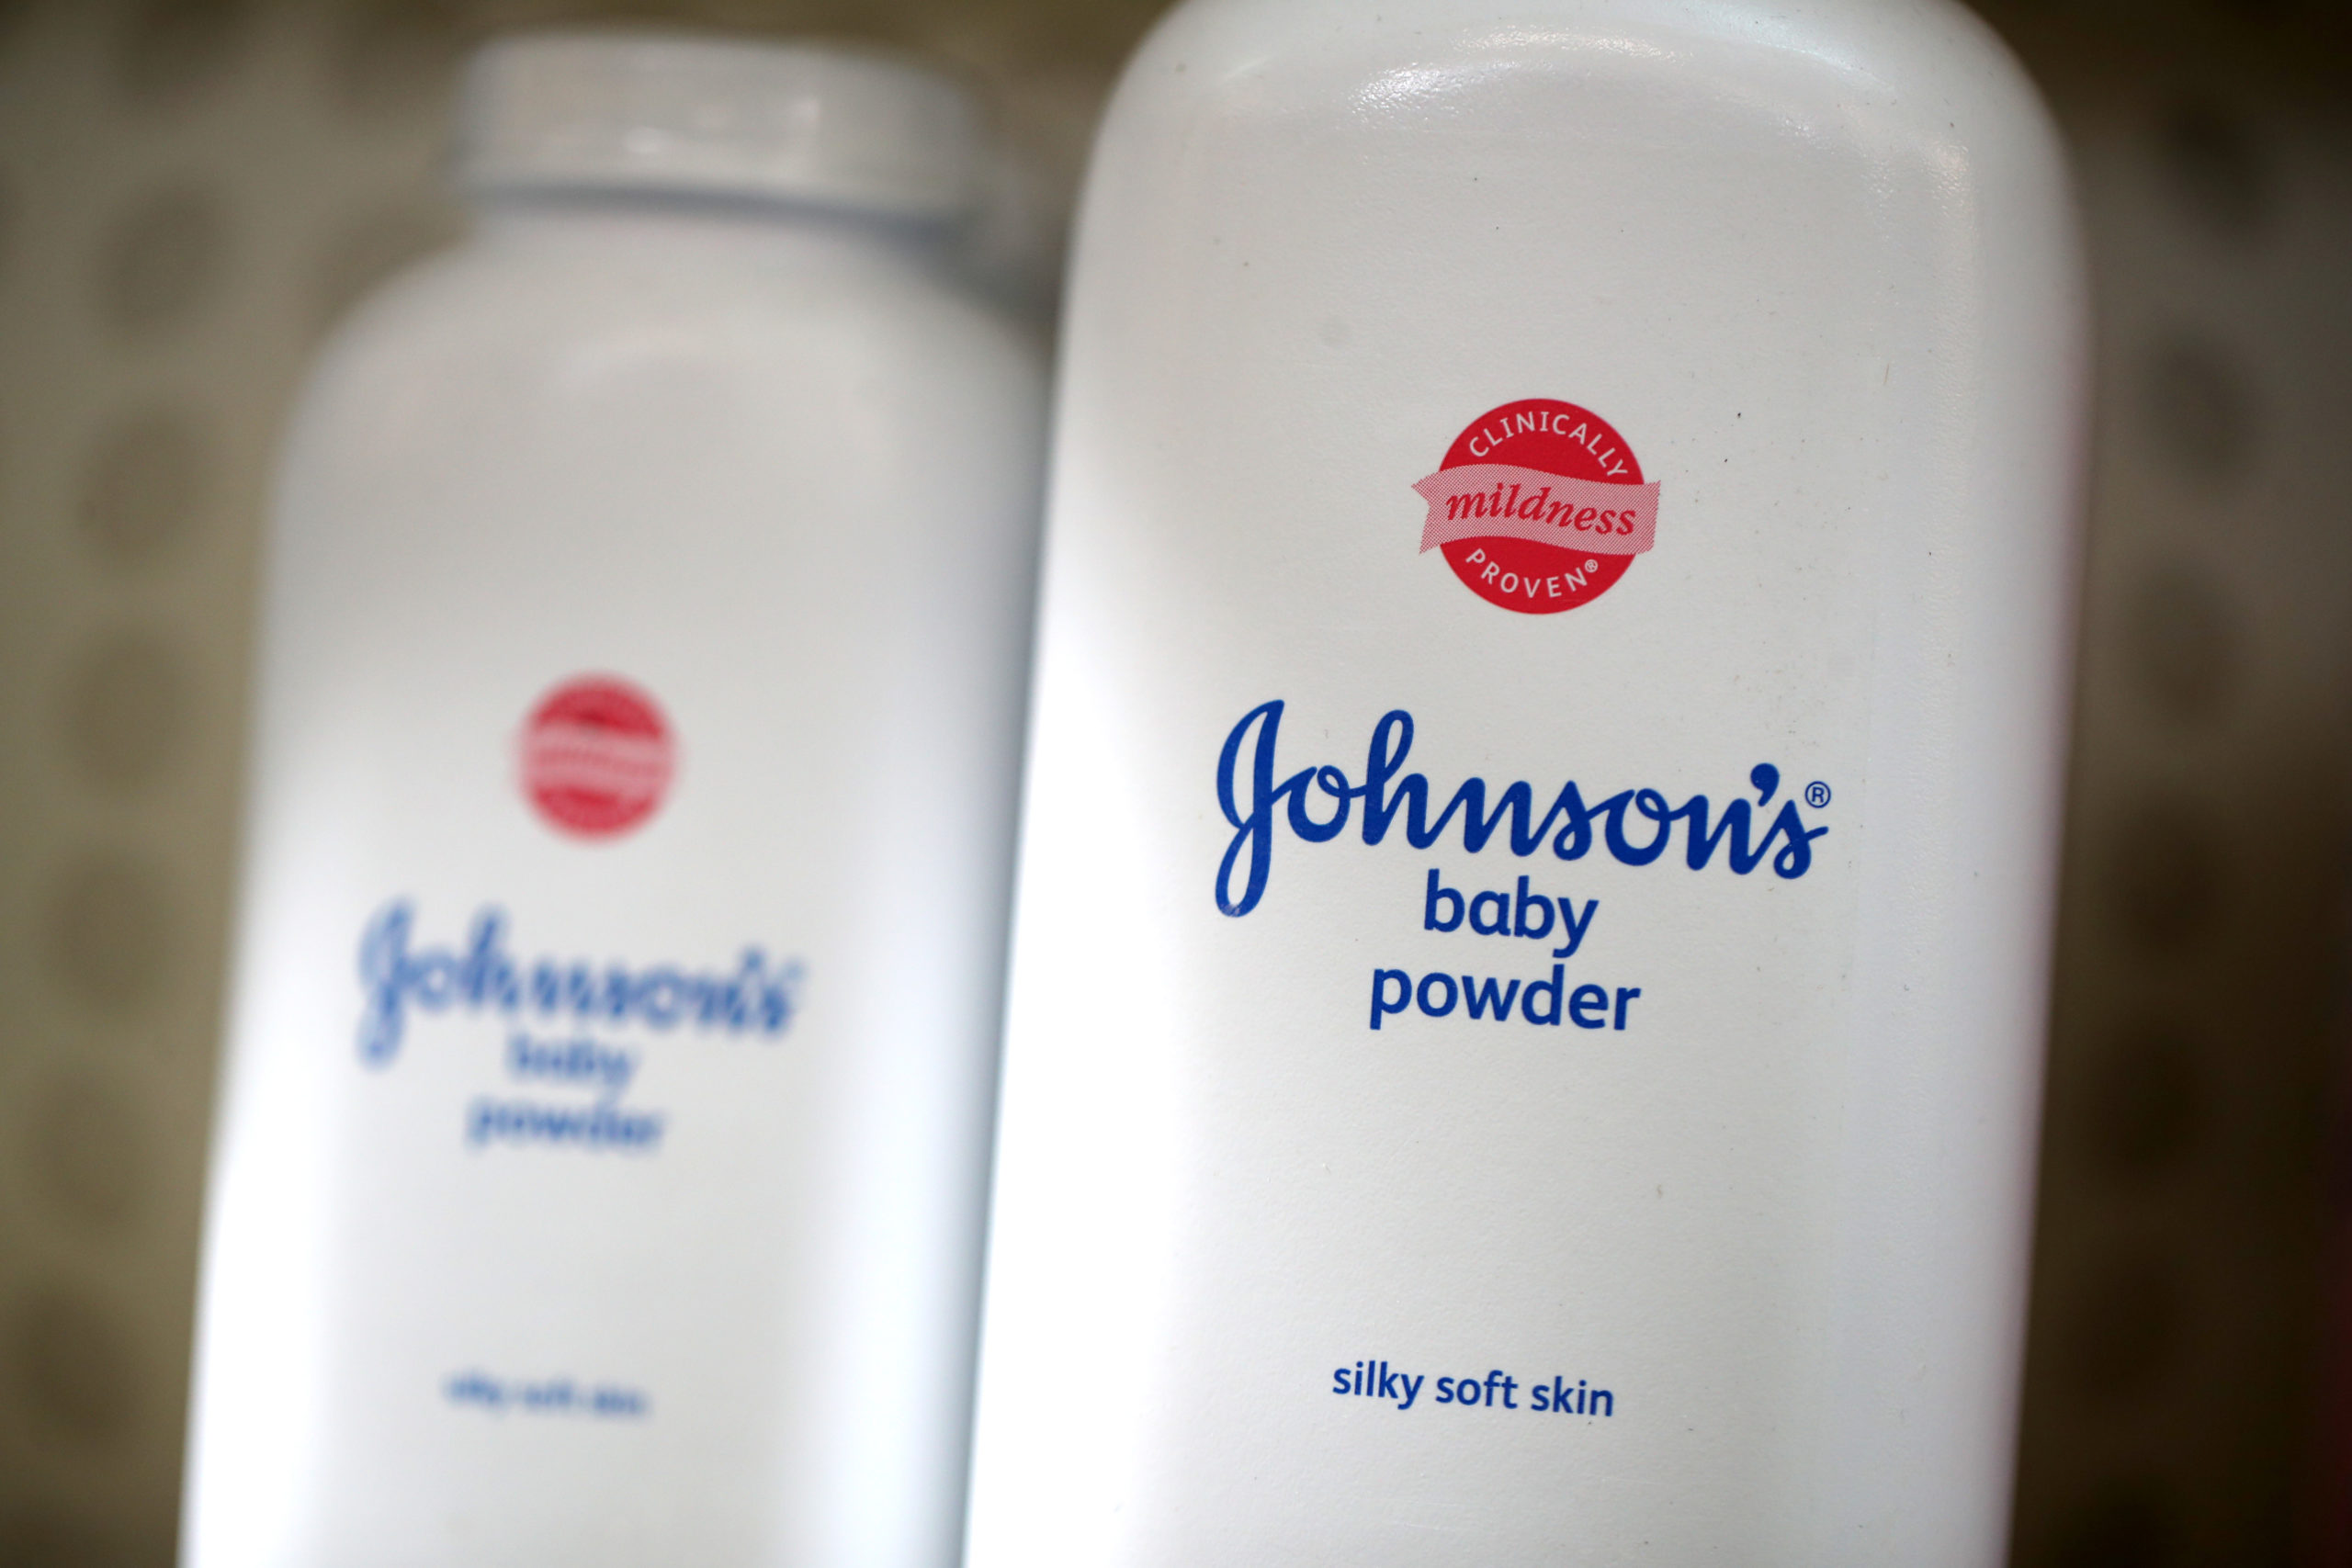 Containers of Johnson's baby powder made by Johnson and Johnson sits on a shelf at Jack's Drug Store on October 18, 2019 in San Anselmo, California. (Photo Illustration by Justin Sullivan/Getty Images)